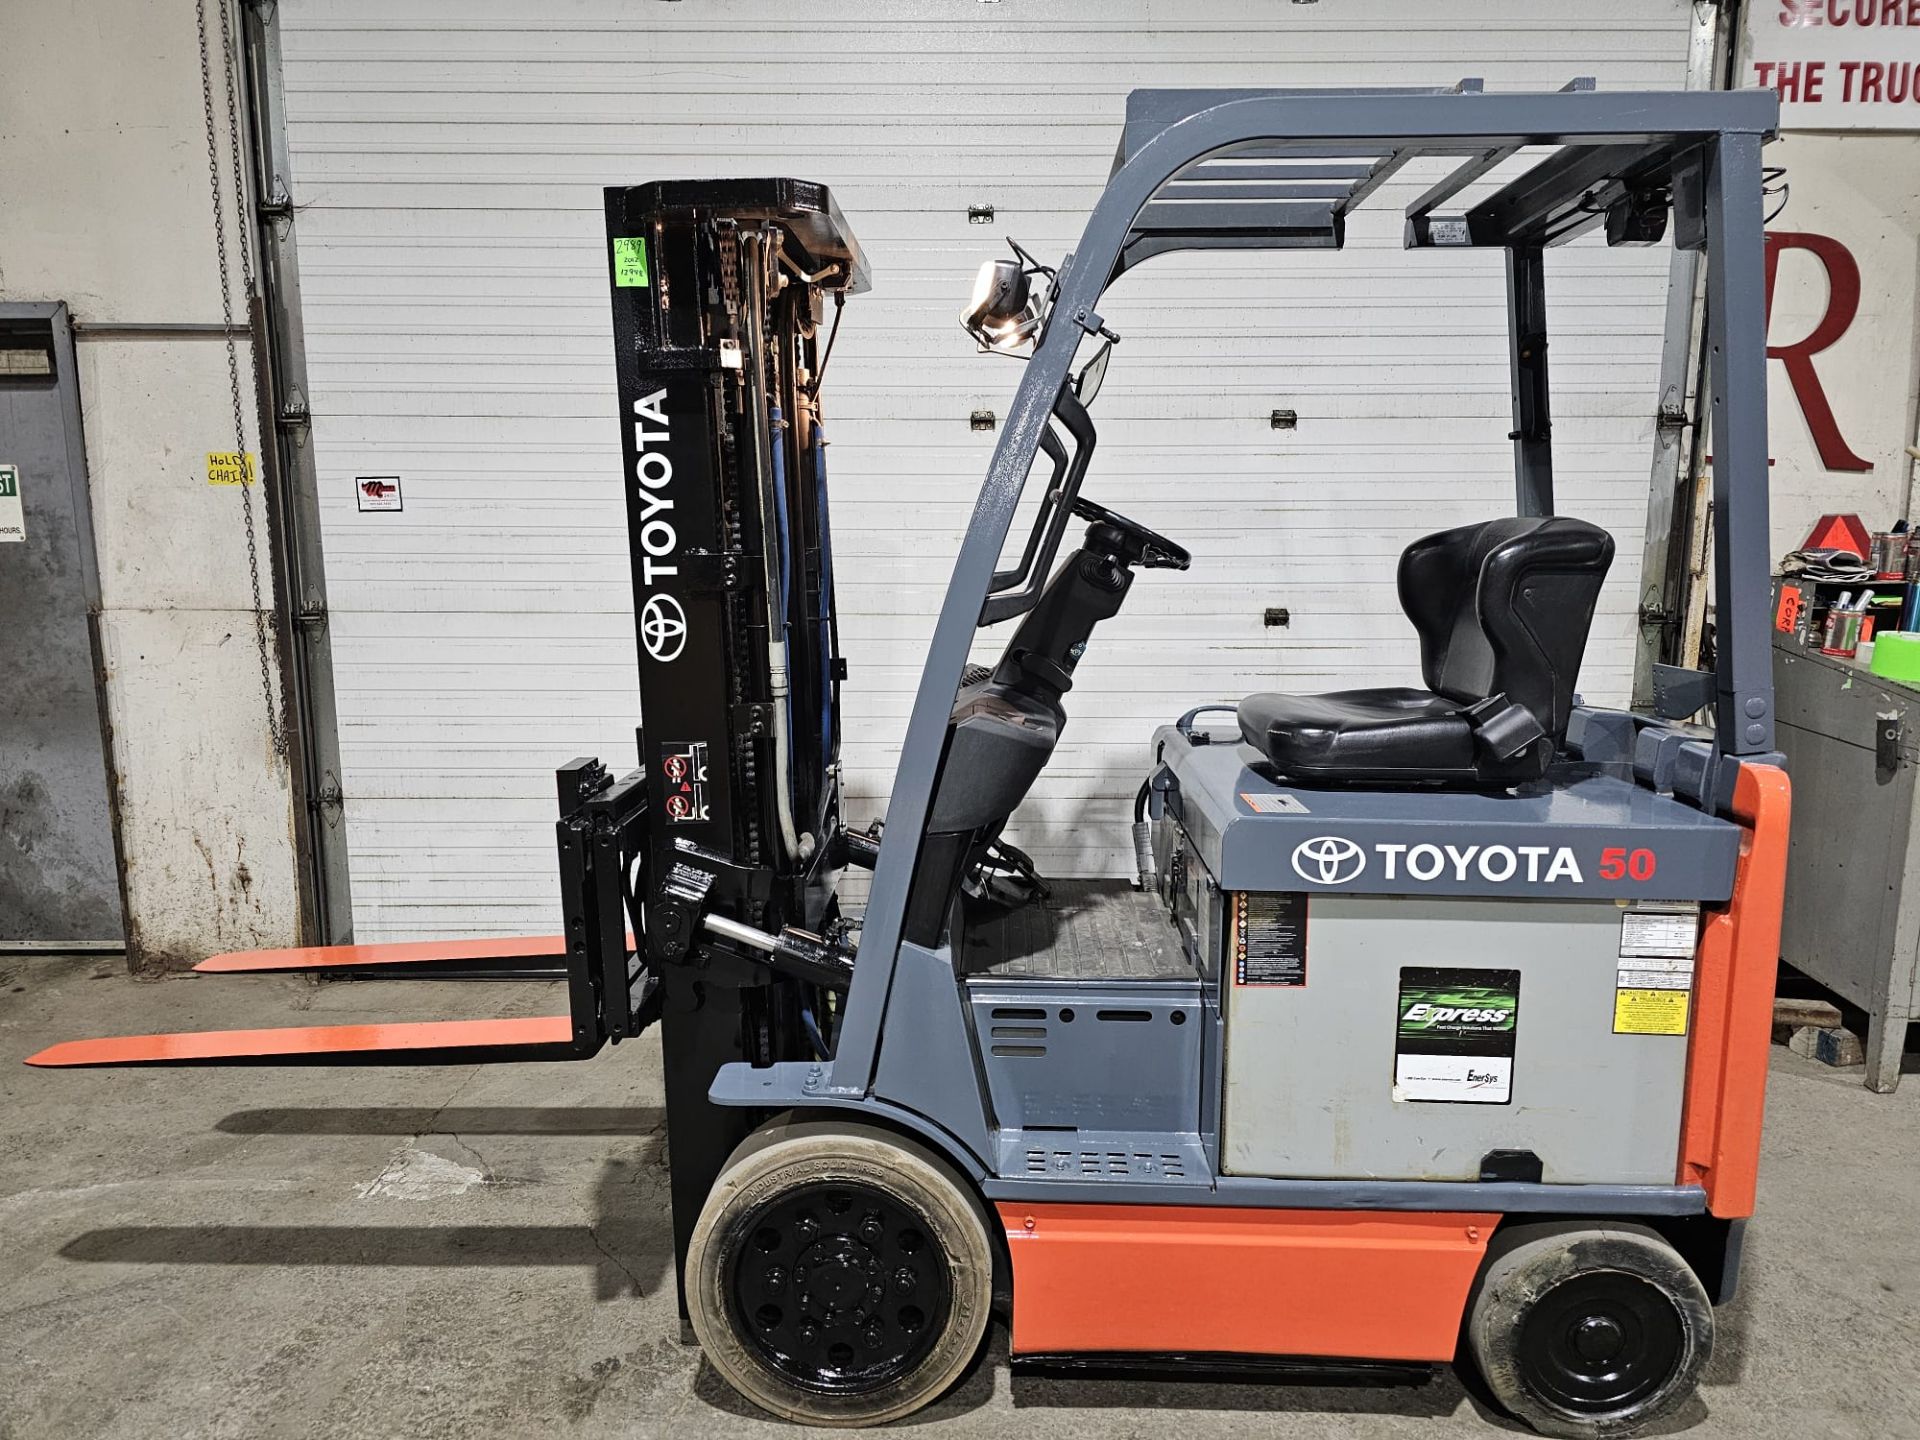 2012 TOYOTA 5,000lbs Capacity Electric Forklift 48V with sideshift & 3-Stage Mast 189" Lift Height -